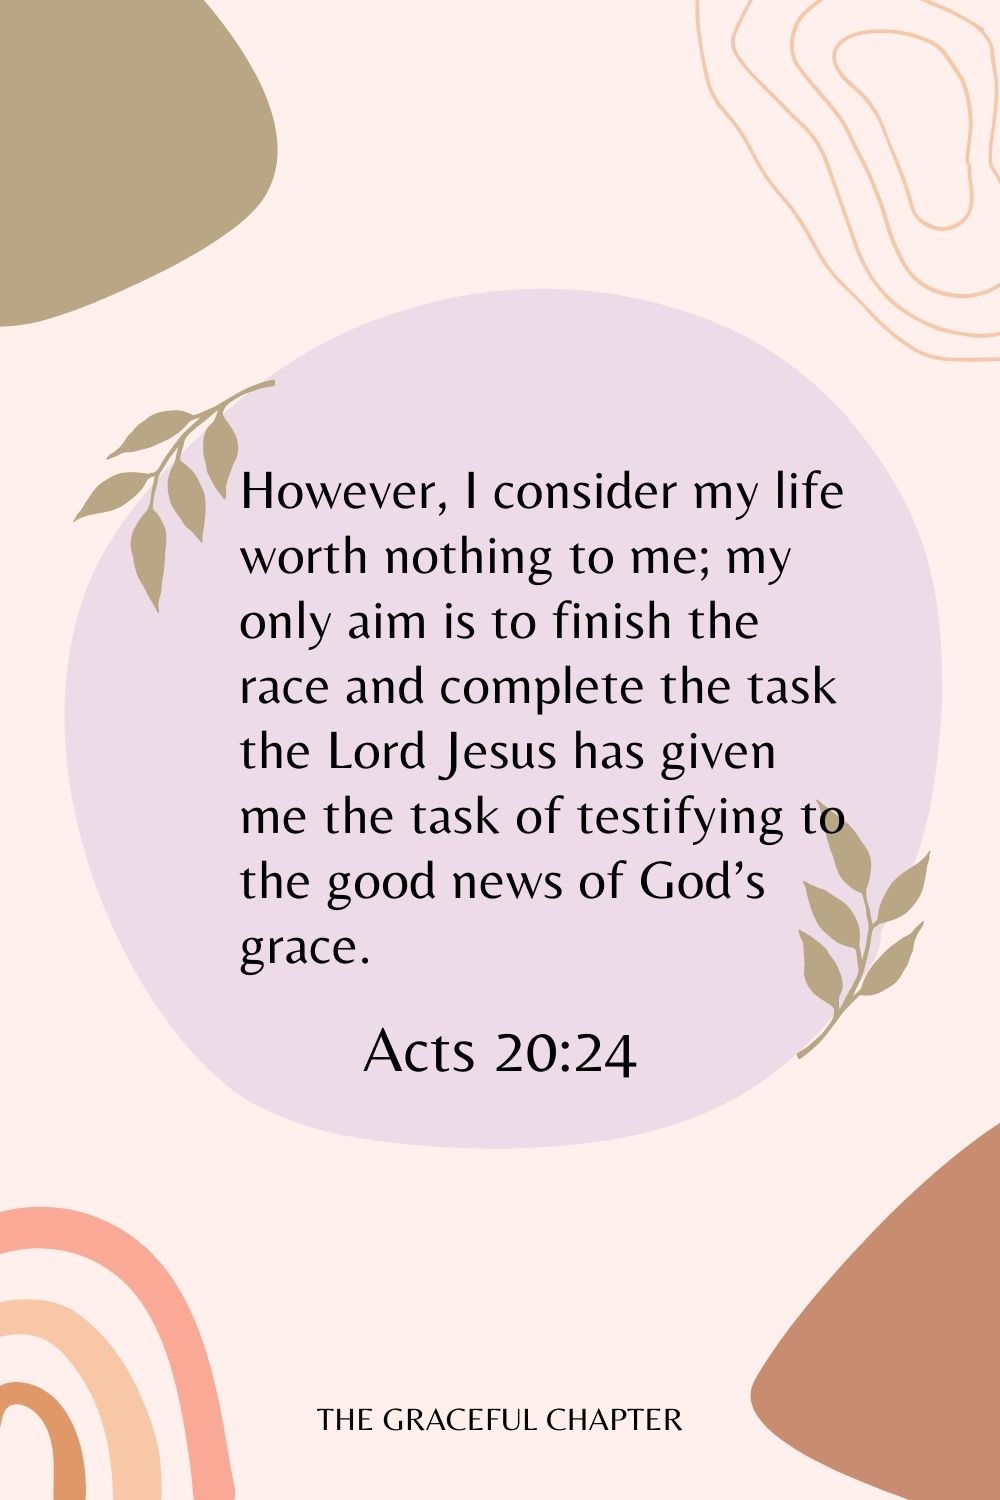 However, I consider my life worth nothing to me; my only aim is to finish the race and complete the task the Lord Jesus has given me the task of testifying to the good news of God’s grace. Acts 20:24